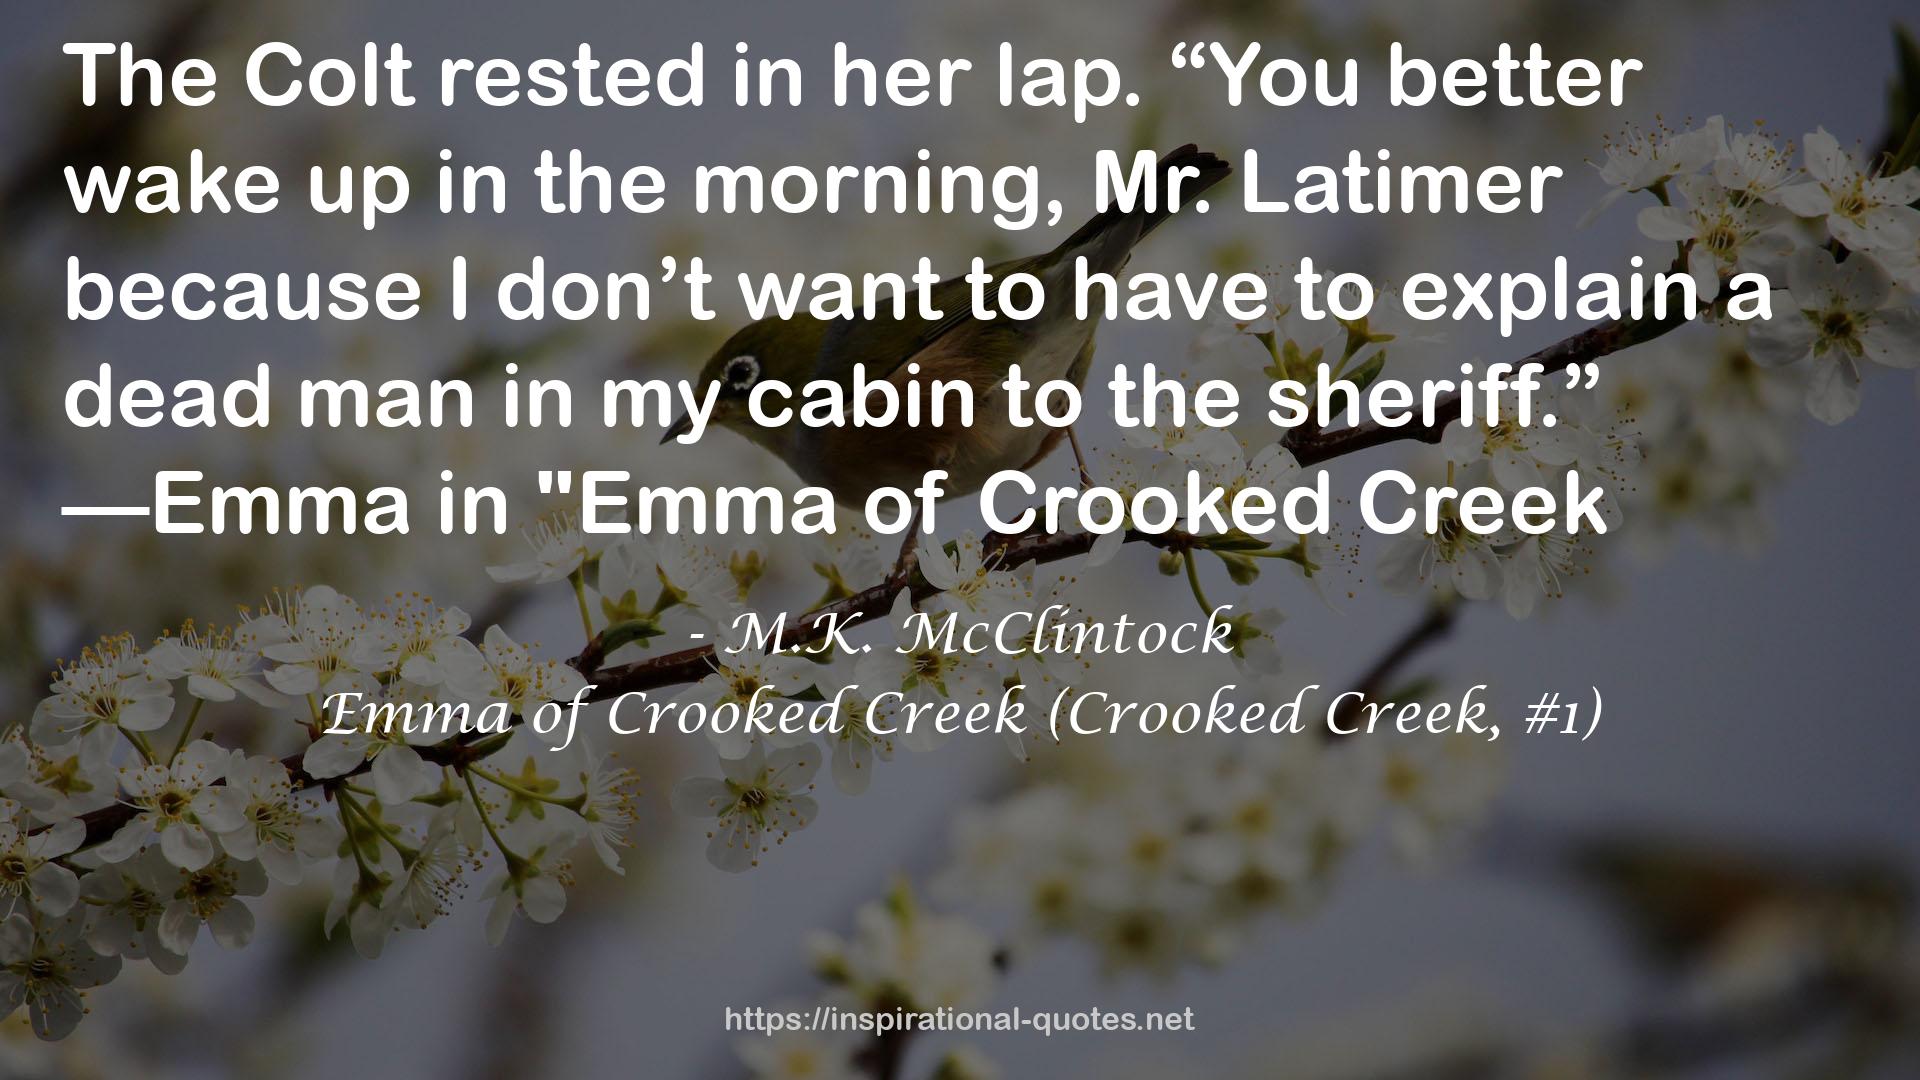 Emma of Crooked Creek (Crooked Creek, #1) QUOTES